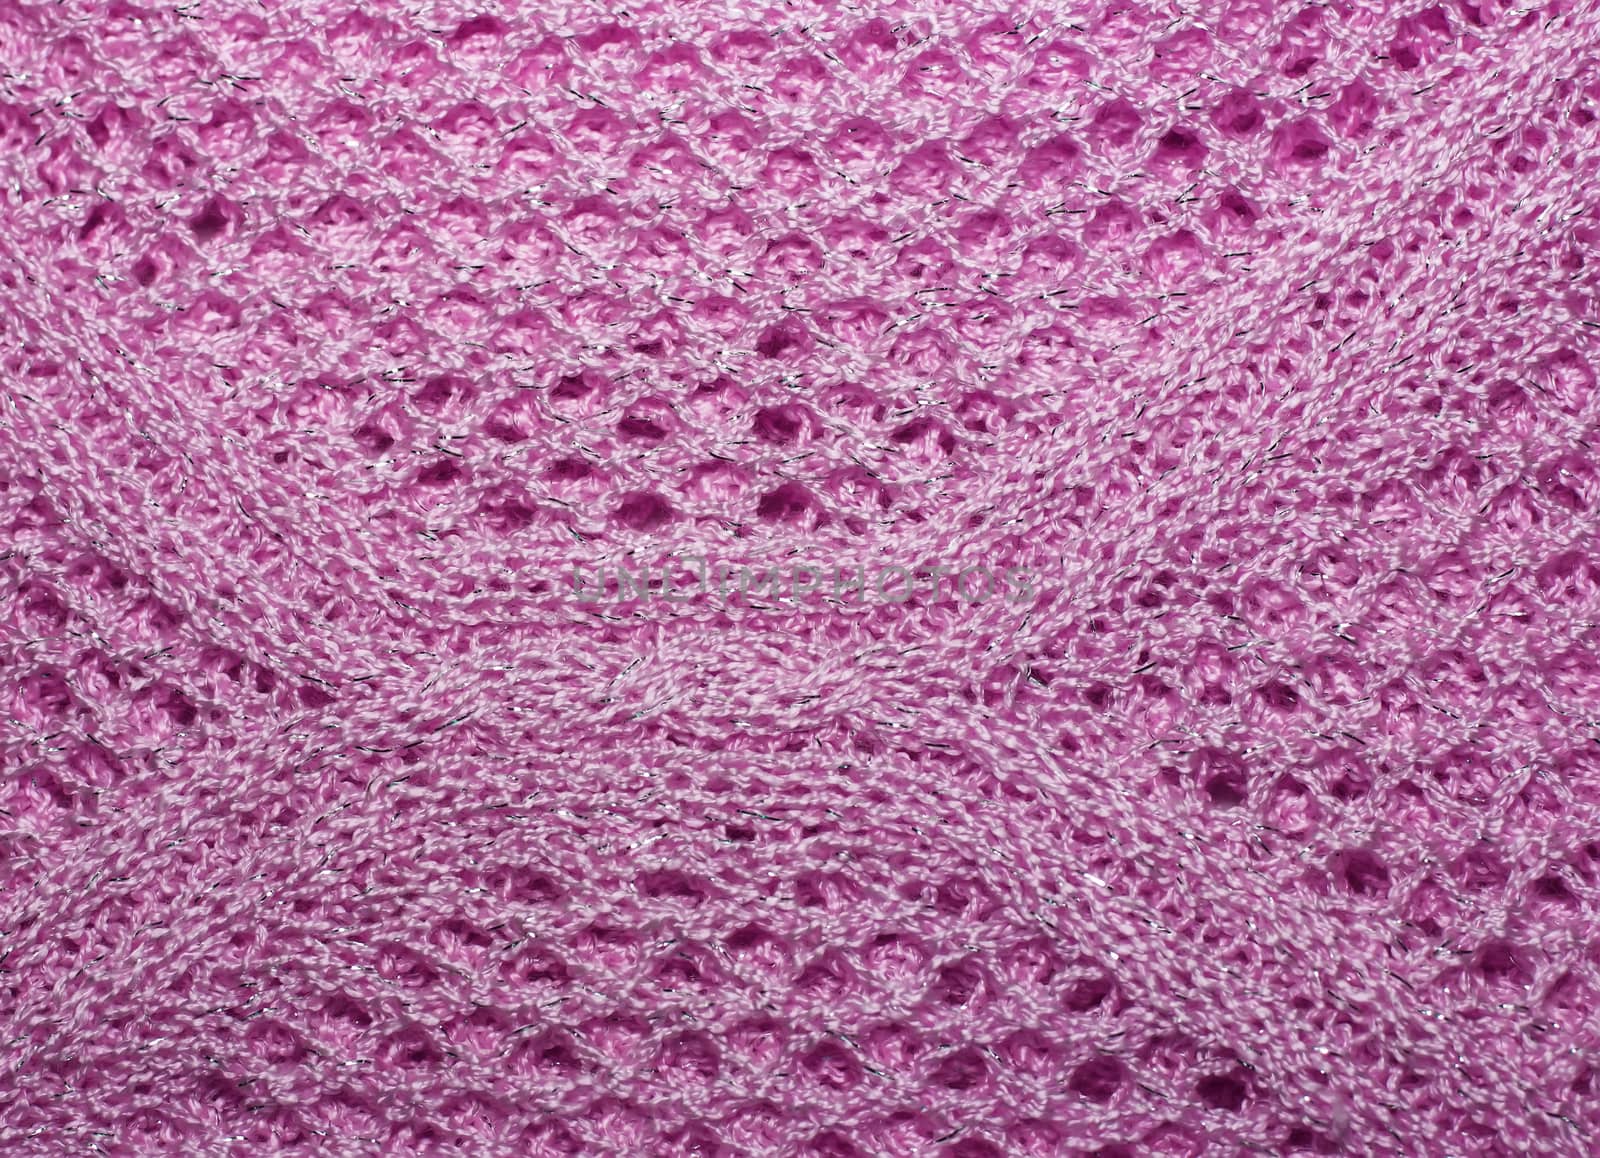 Pink knitted wool fabric texture closeup. with lurex thread, Jersey Knitted background with a relief pattern